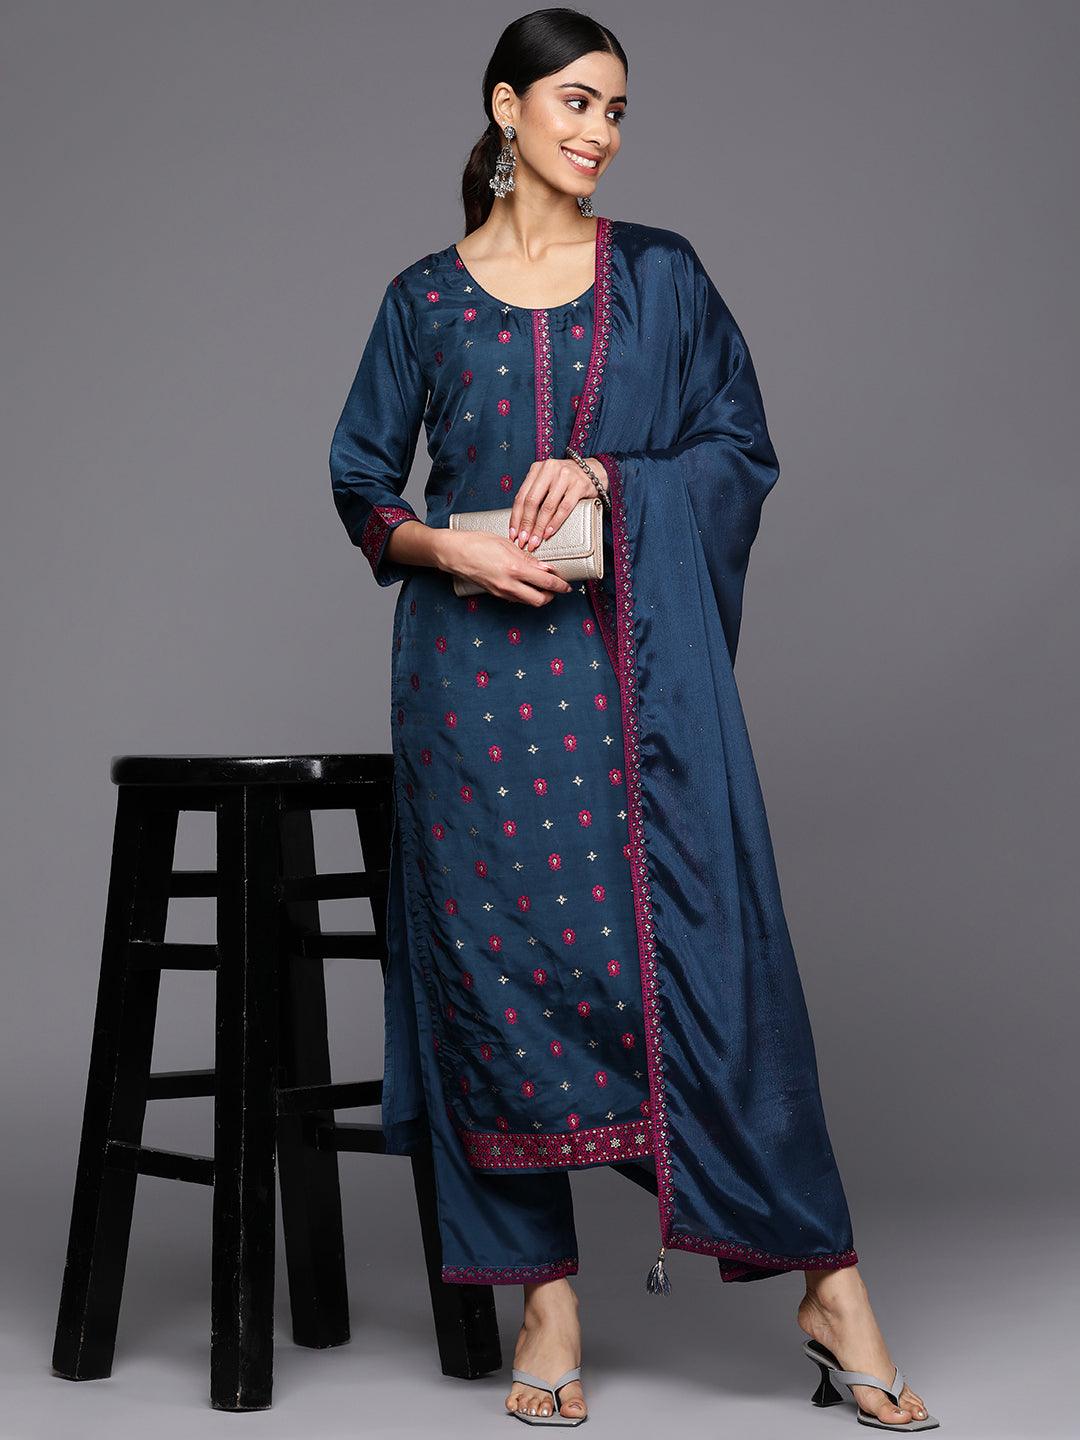 Navy Blue Self Design Silk Blend Straight Suit Set With Trousers - Libas